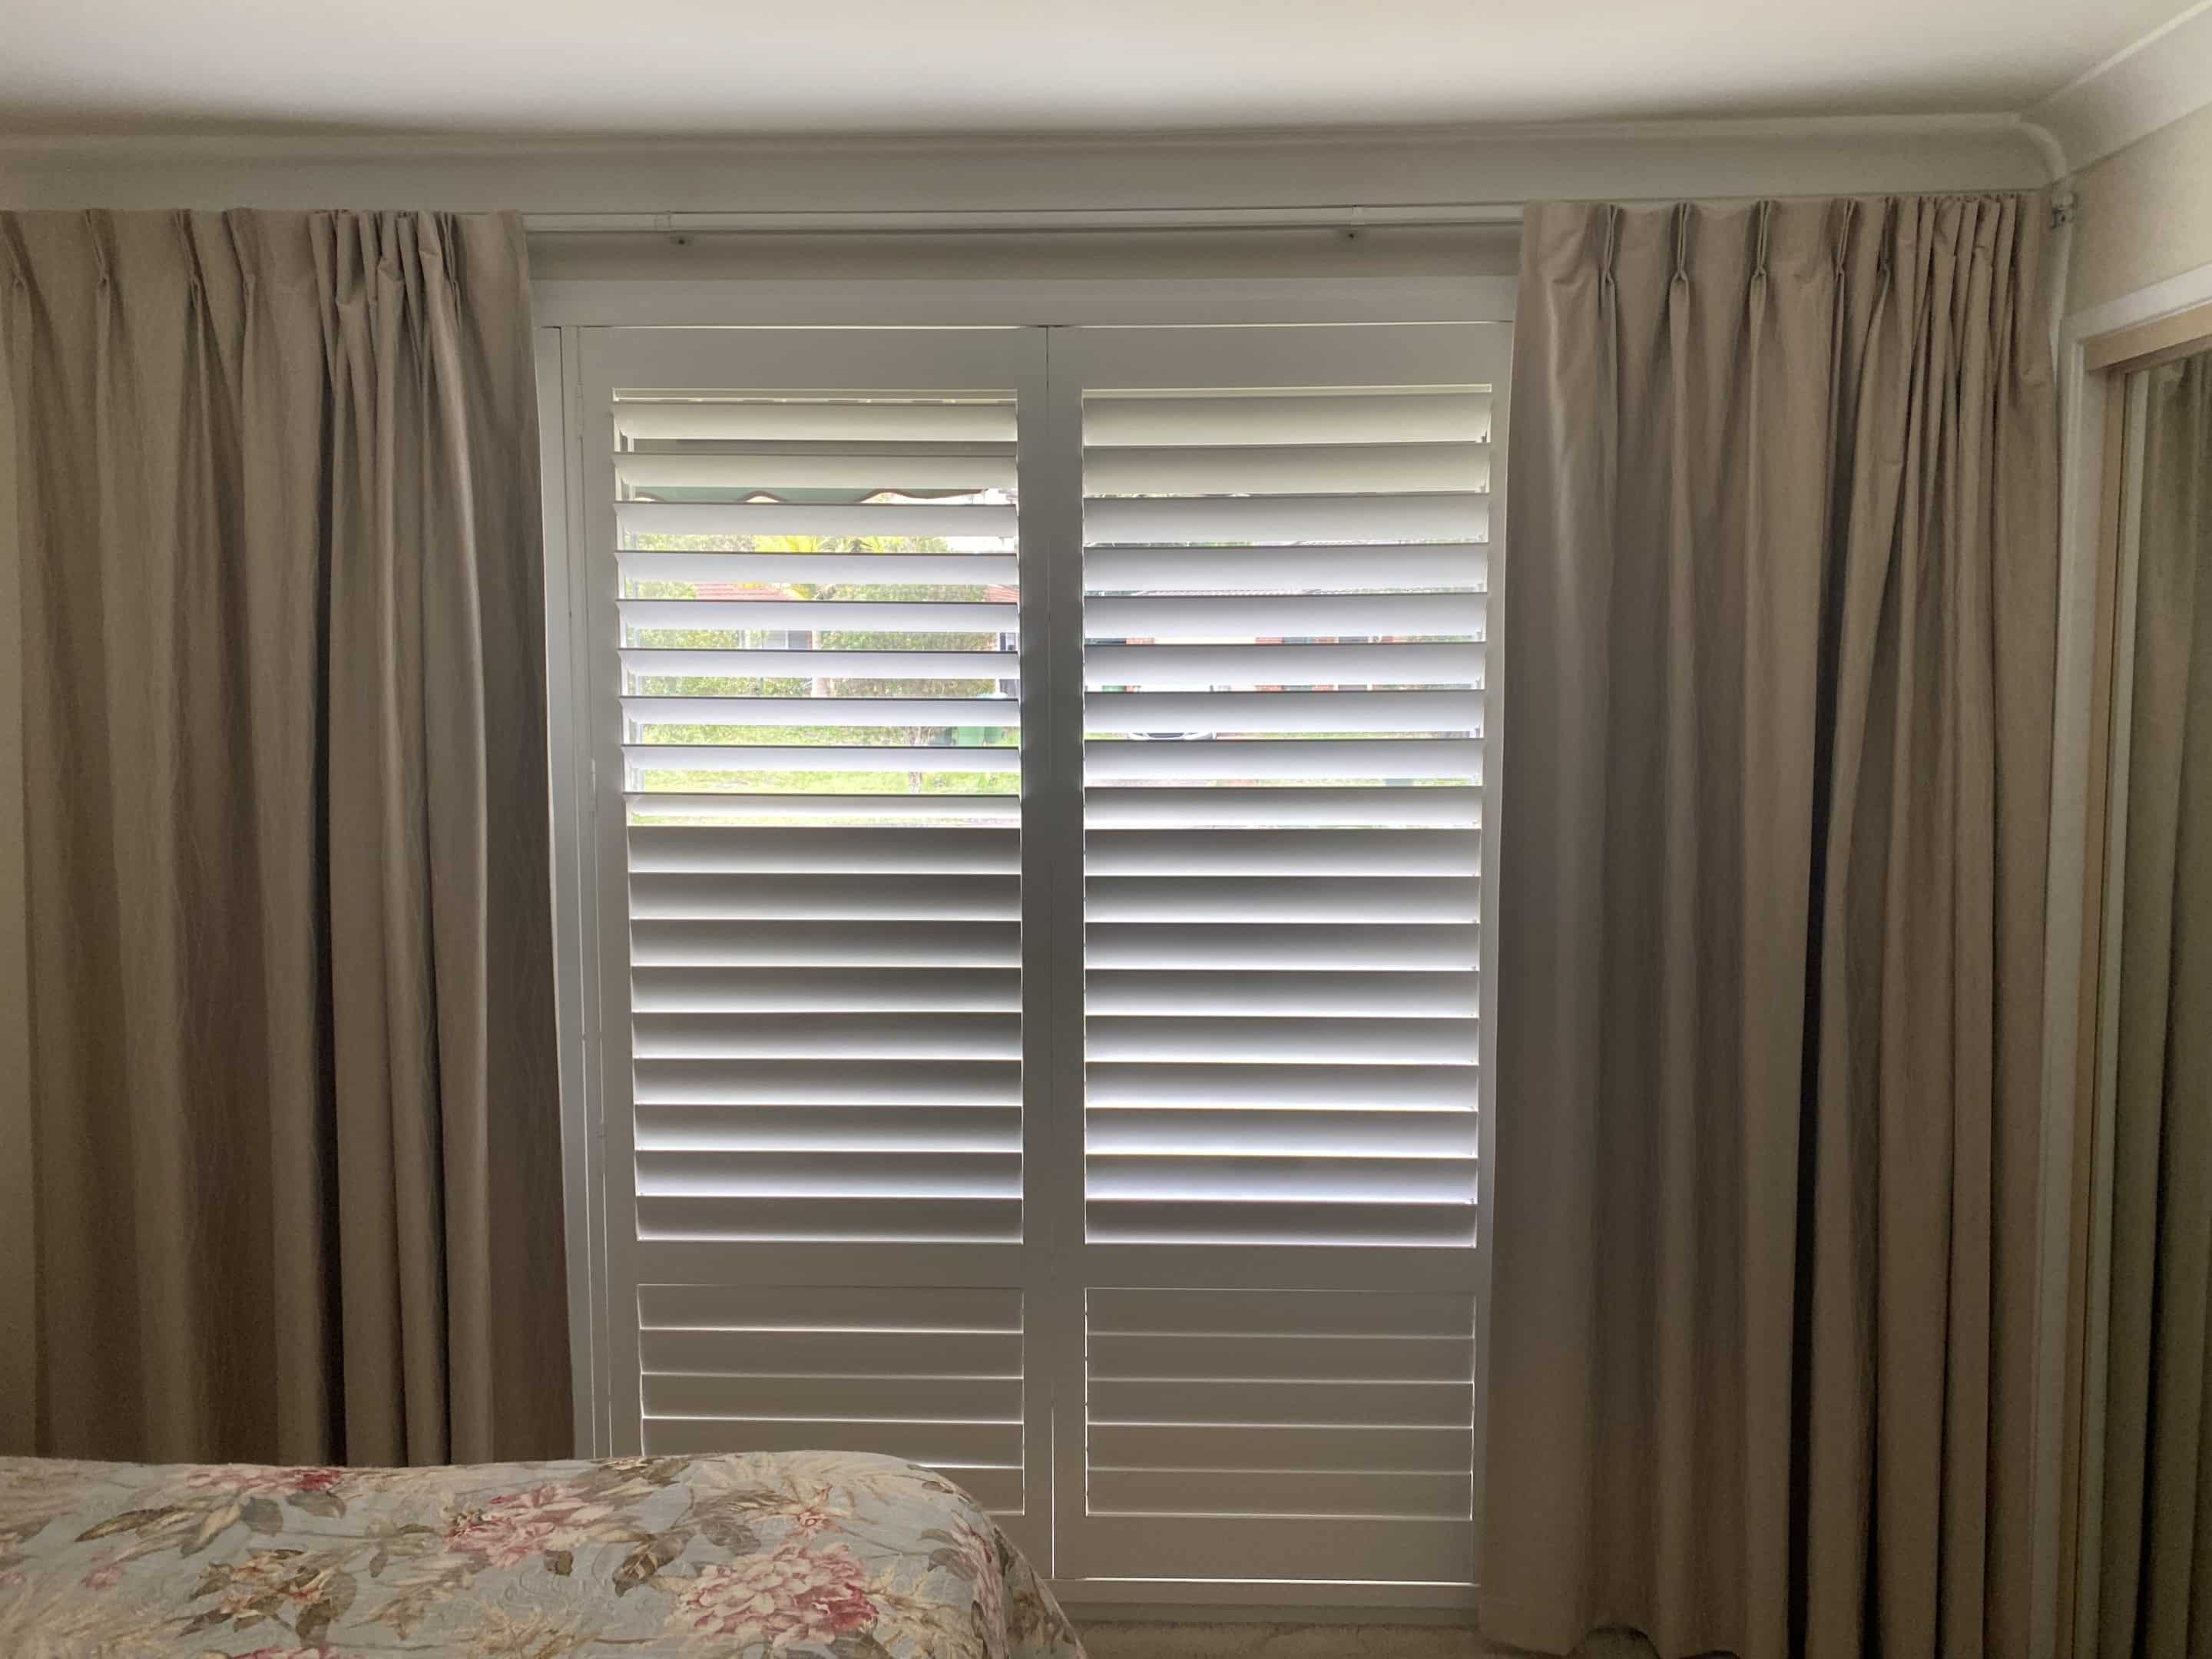 curtains and plantation shutters pairing